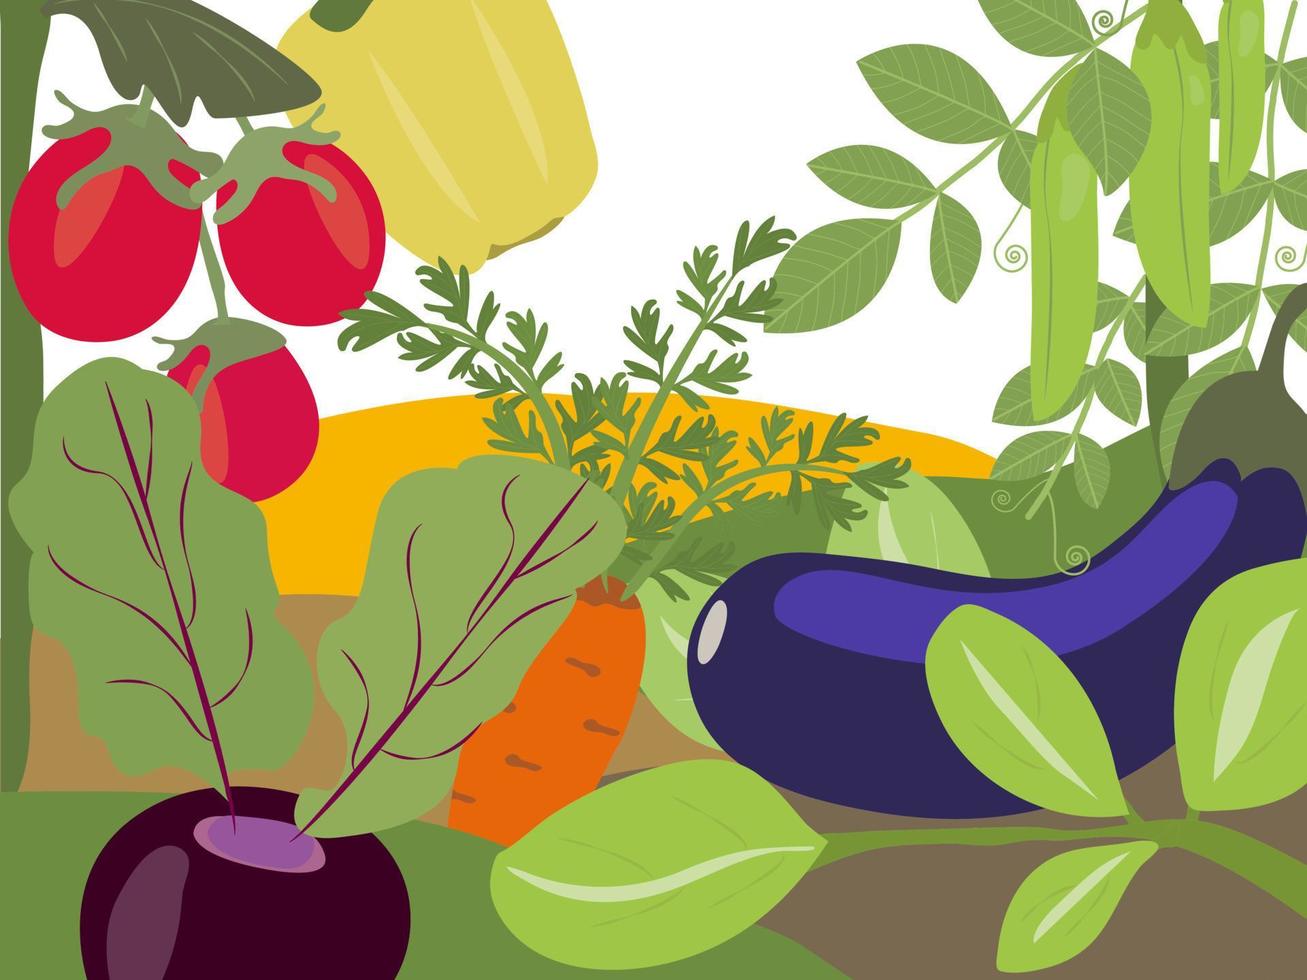 Stylish background with the image of ripe vegetables. Juicy tomatoes, sweet peppers, bright beets and carrots. Royal eggplant, cheerful peas. Packaging and advertising of eco, bio farm product vector